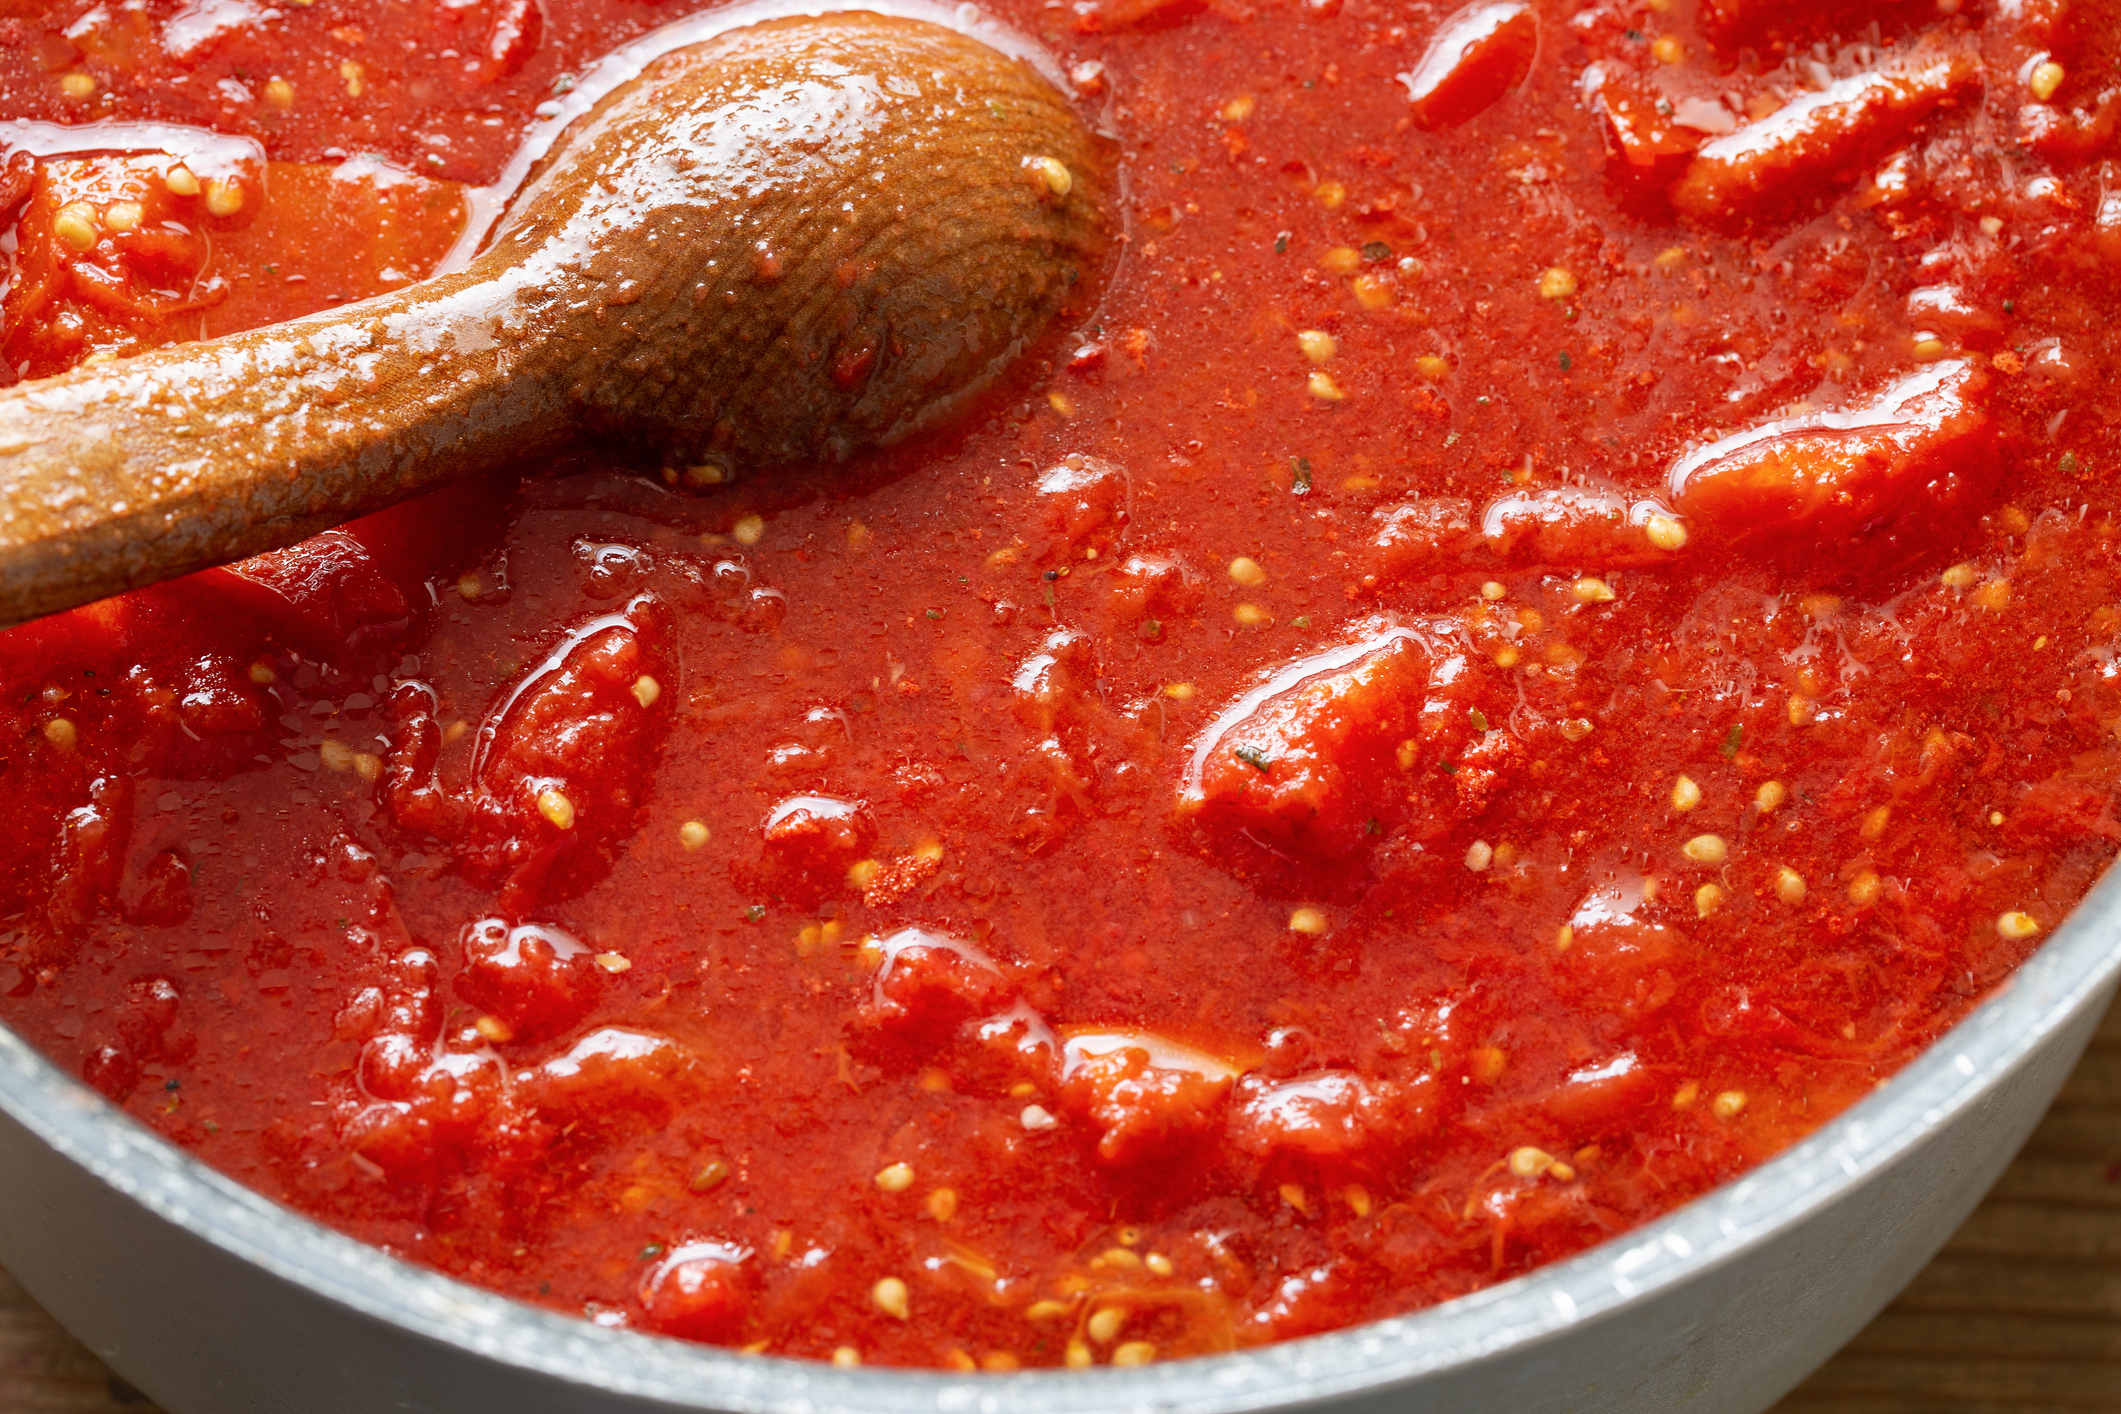 A close-up of a bowl of tomato sauce with a wooden spoon